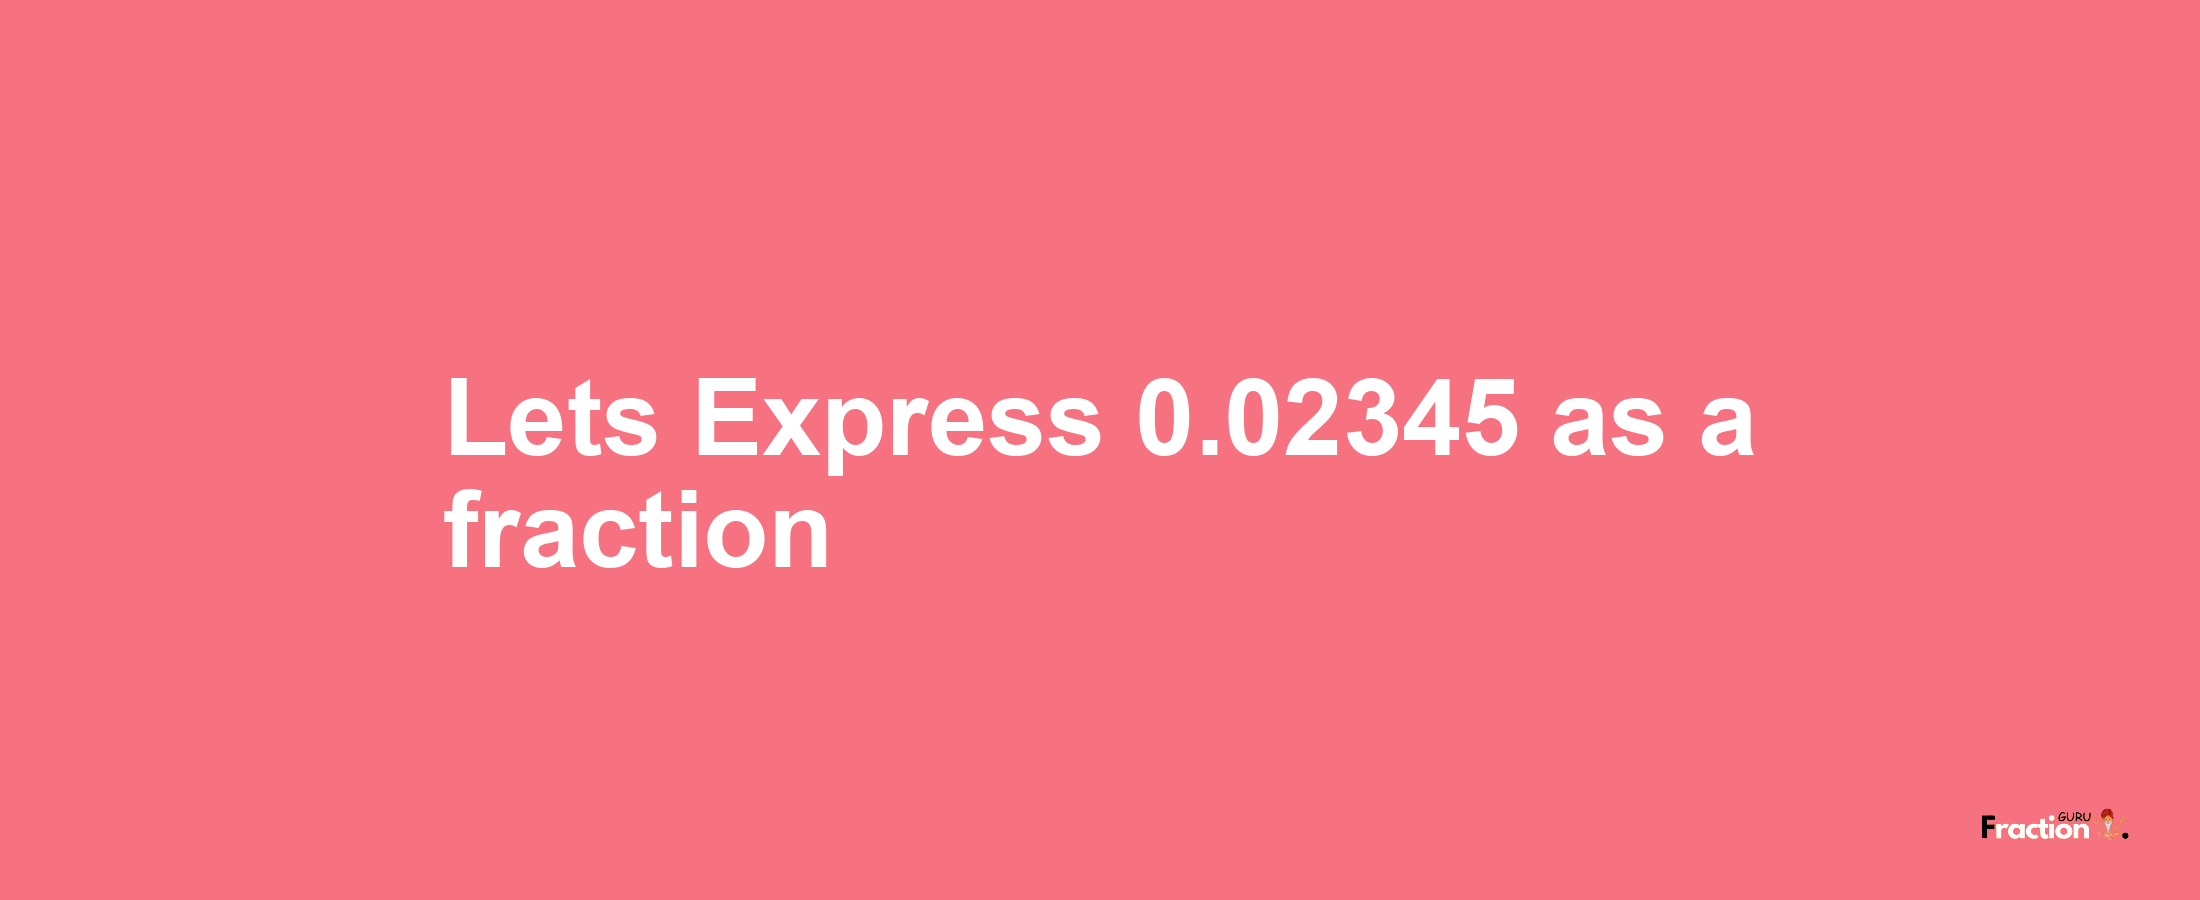 Lets Express 0.02345 as afraction